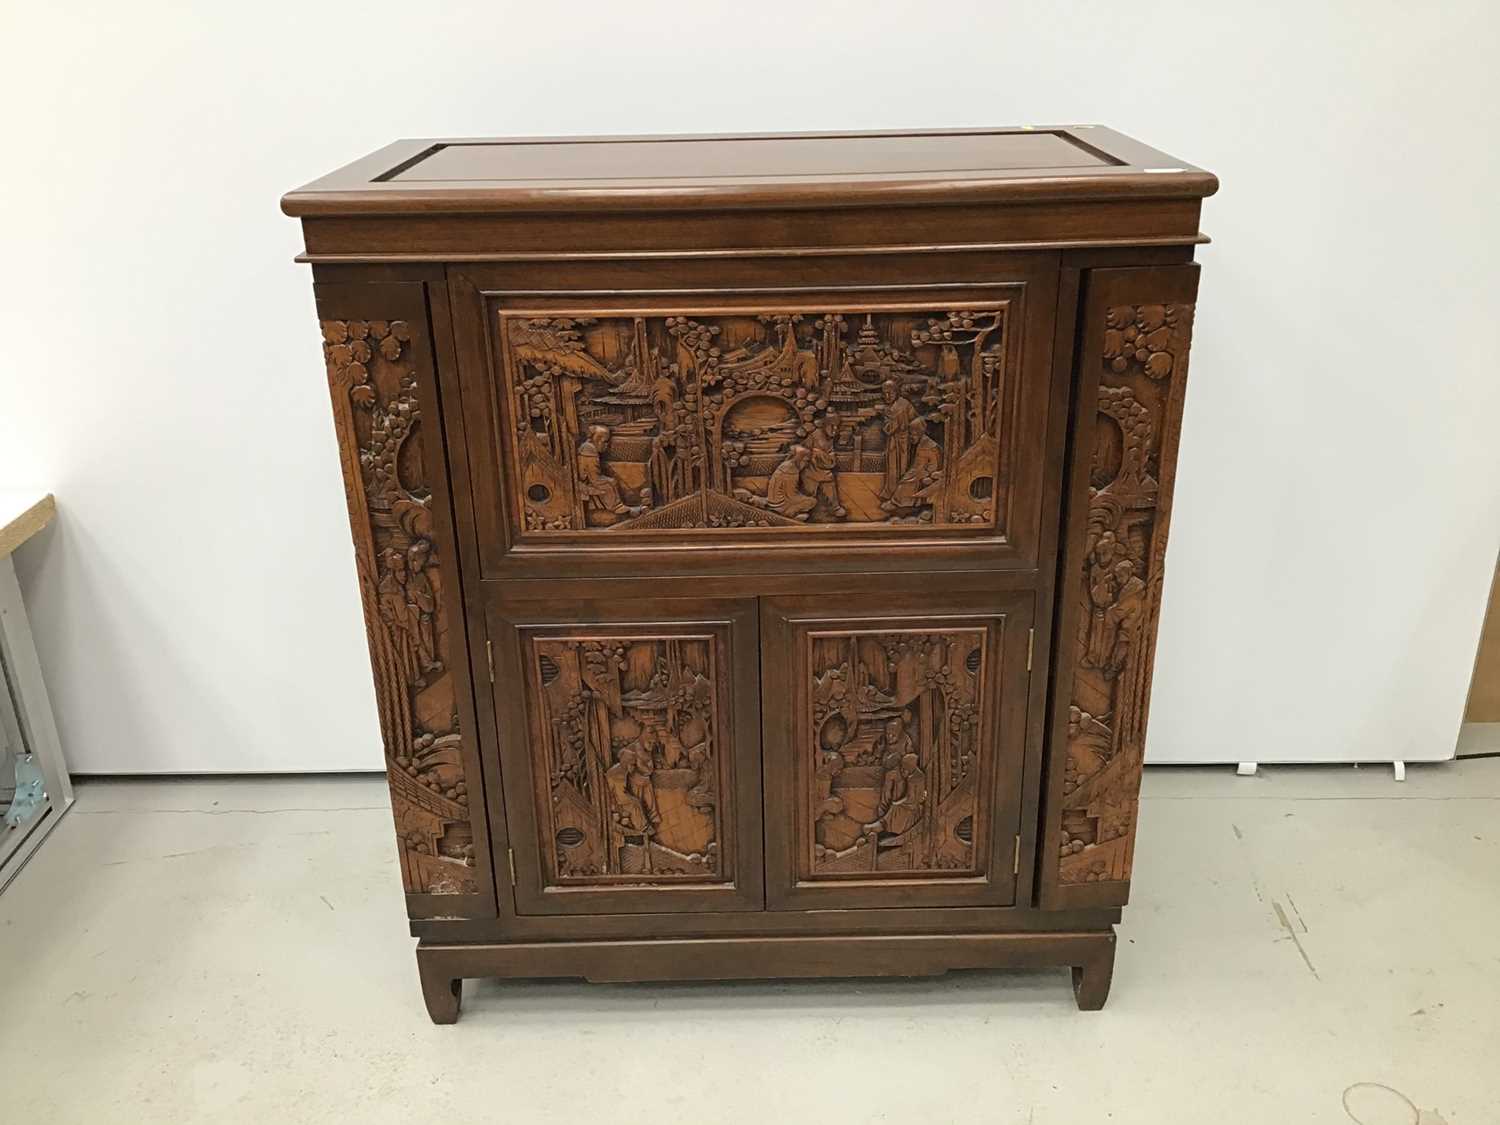 Lot 6 - Chinese carved wooden cocktail cabinet